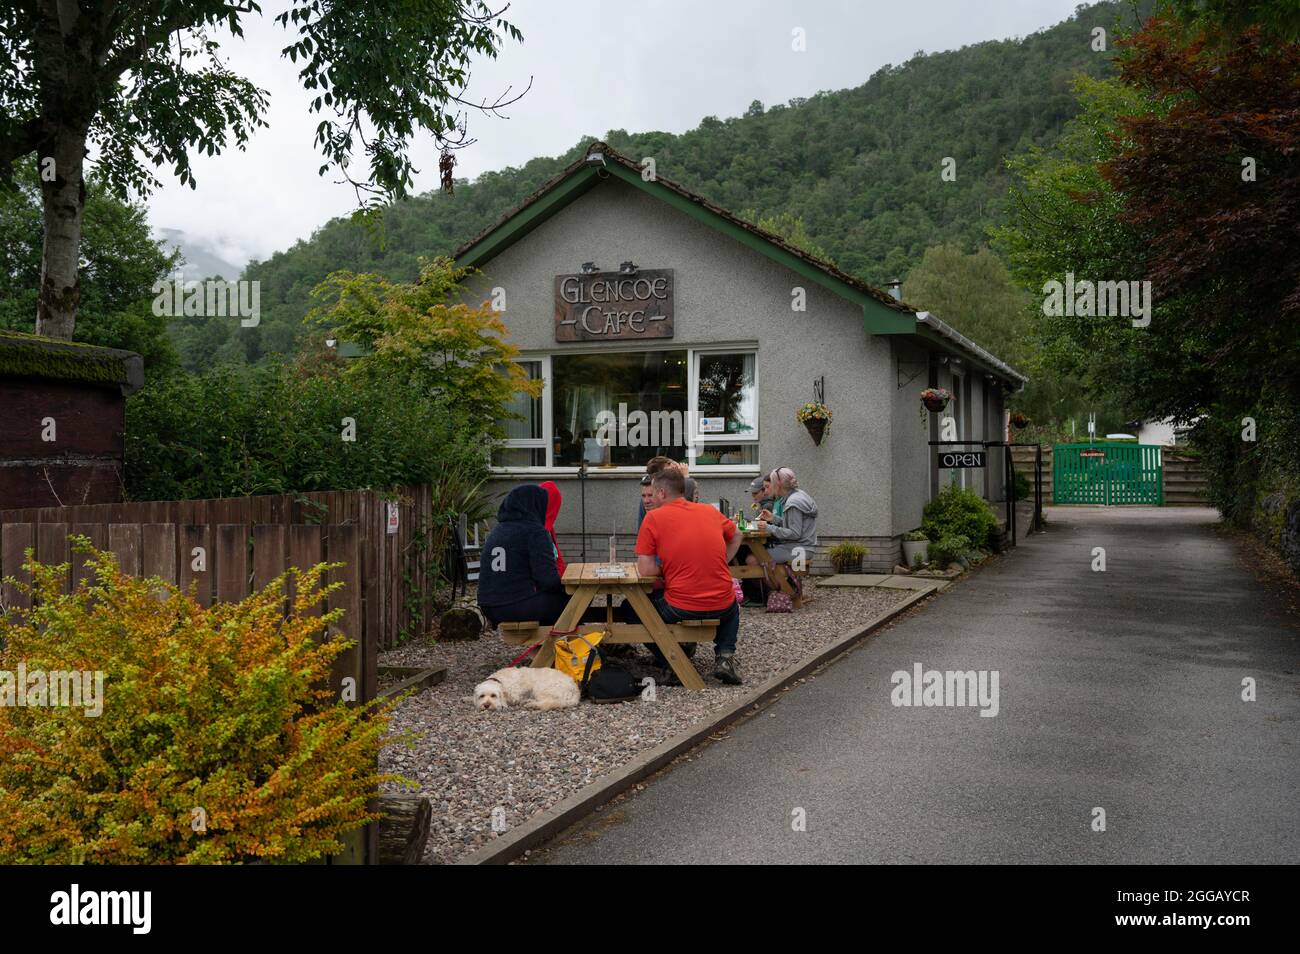 Exterior of Glencoe Cafe in Scottish Highlands. People and dog outside eating at benches. Cafe sign and drive leading to car park. Stock Photo